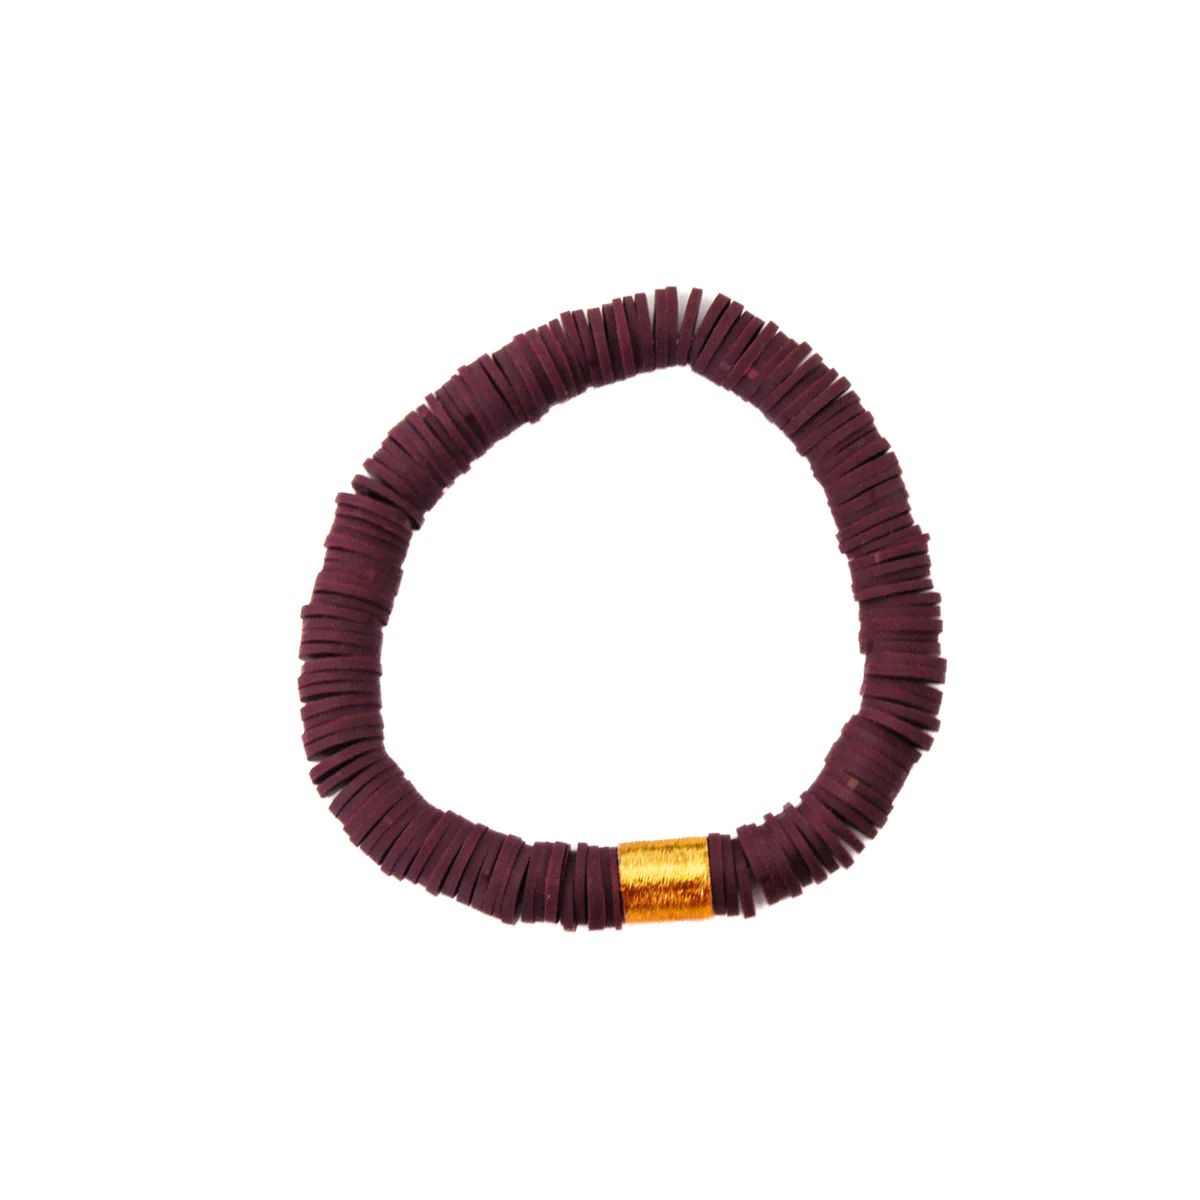 The Maroon Jennings | Cocos Beads and Co